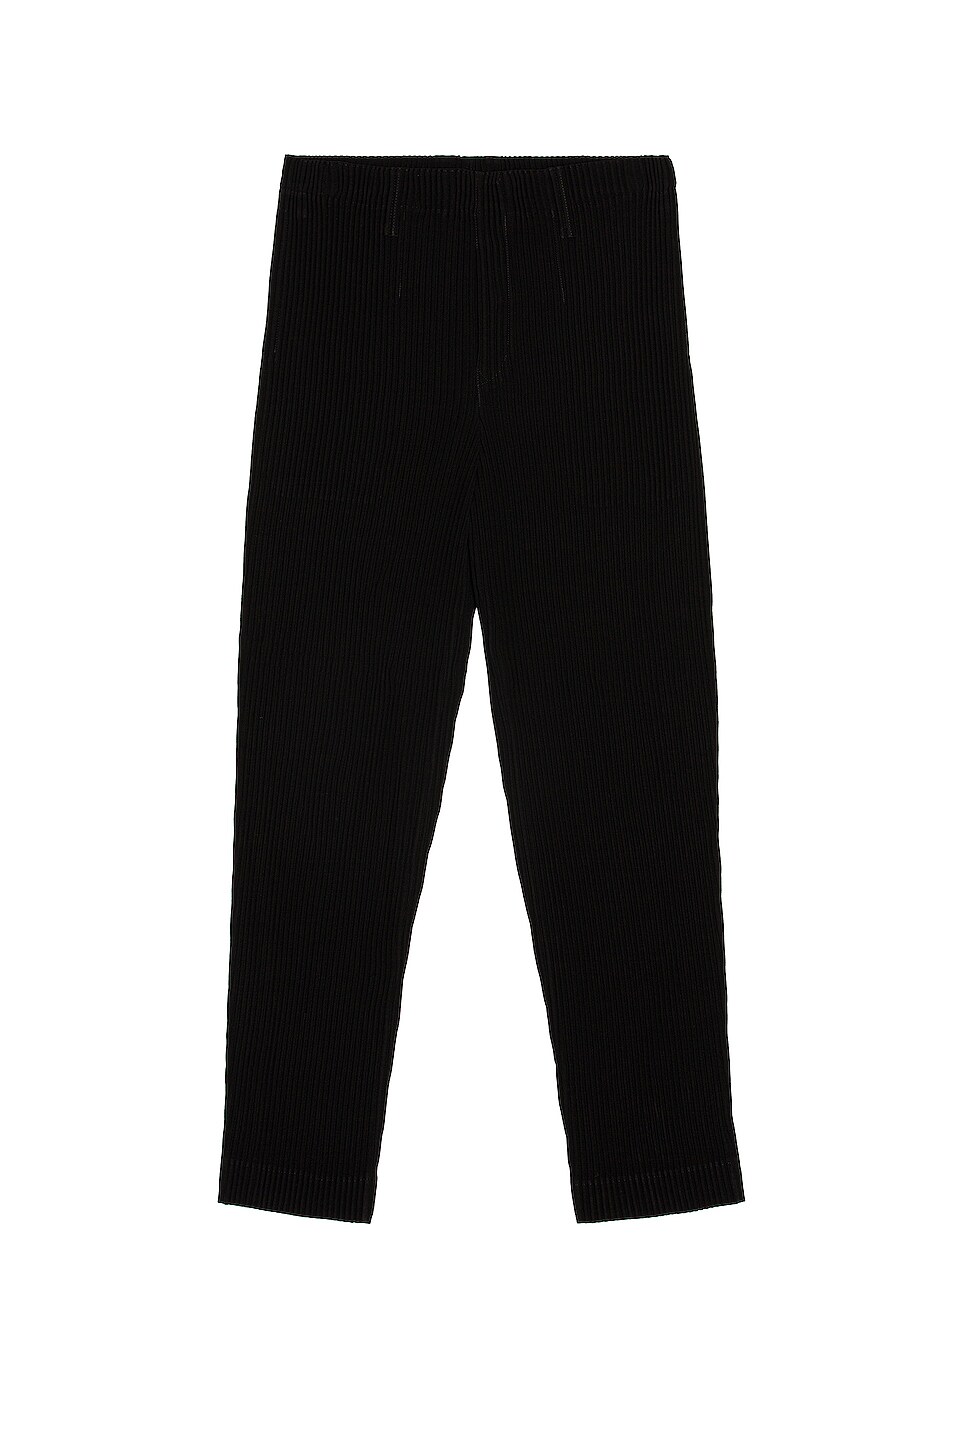 Image 1 of Homme Plisse Issey Miyake Tuxedo Pleats Tapered Pant in Black